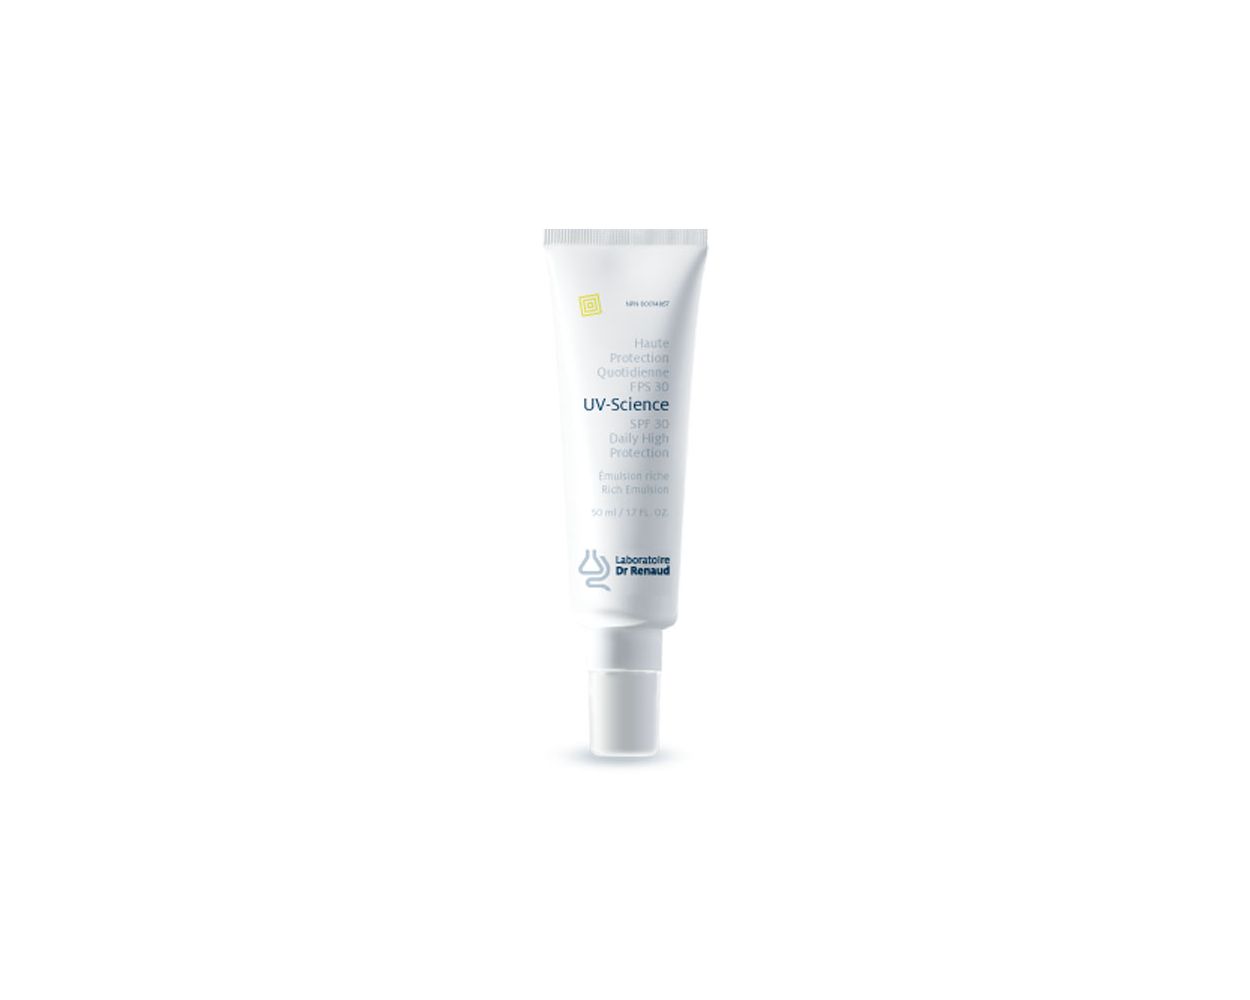 Dr Ren Daily High Protect SPF30